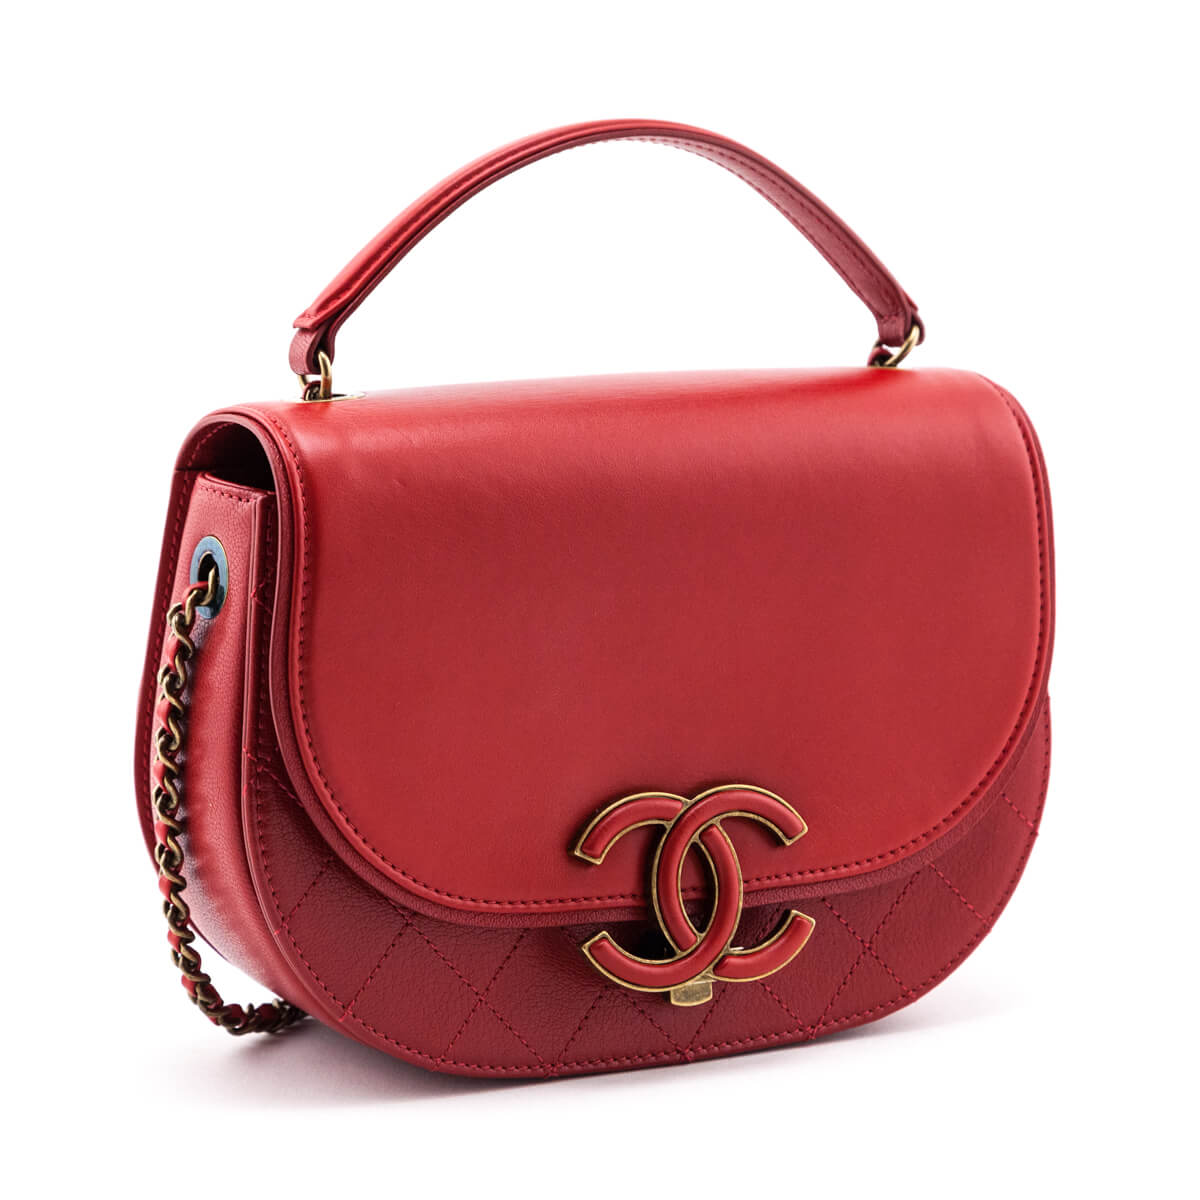 Coco curve leather handbag Chanel Red in Leather - 33404305